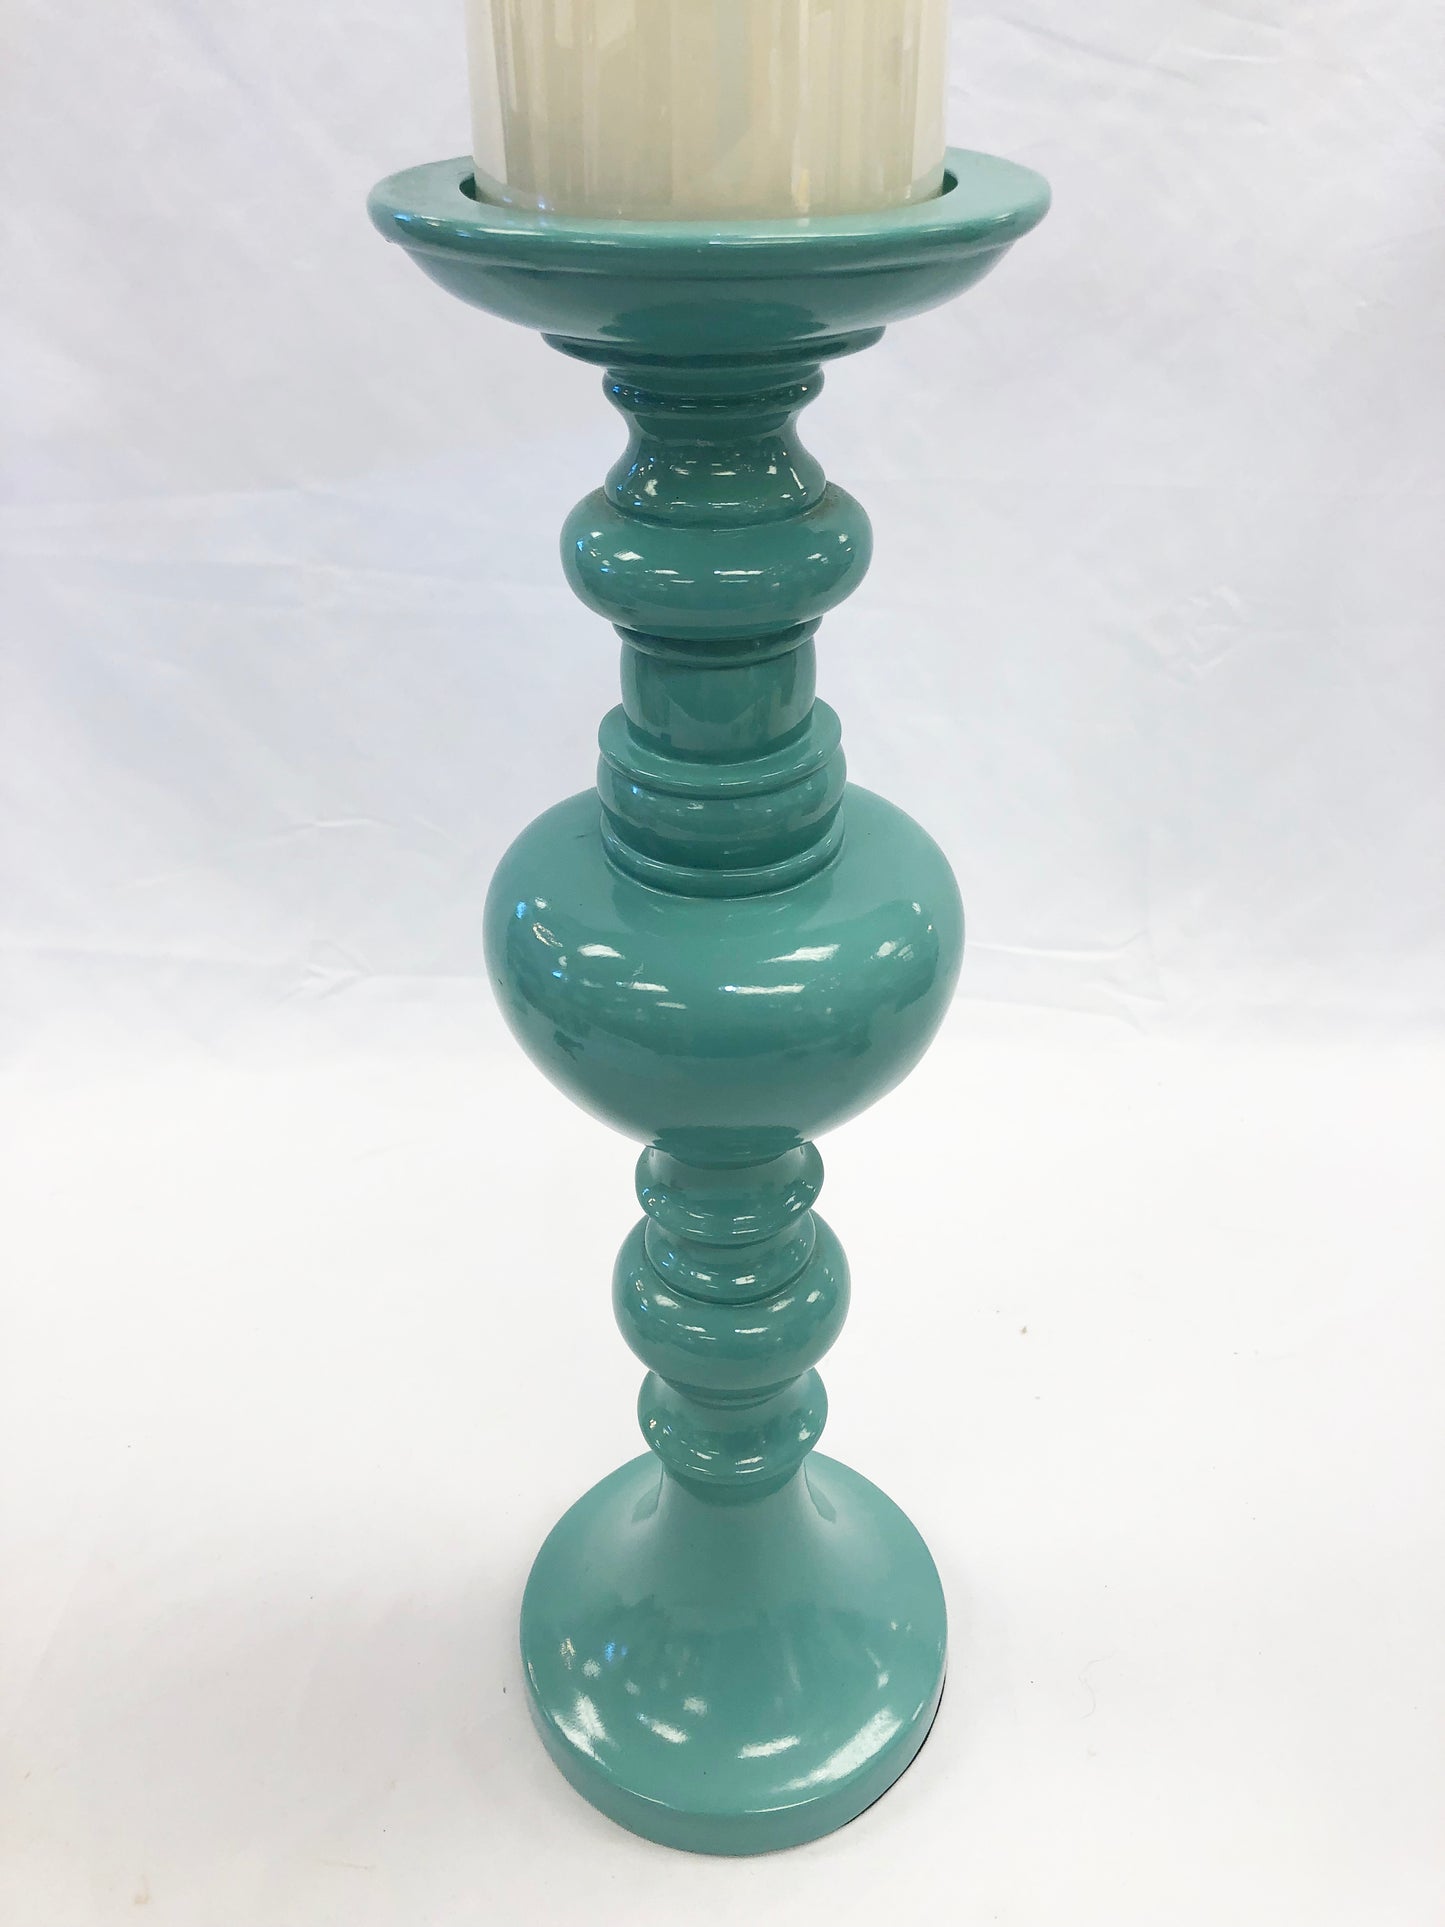 Teal Resin Candle Holders